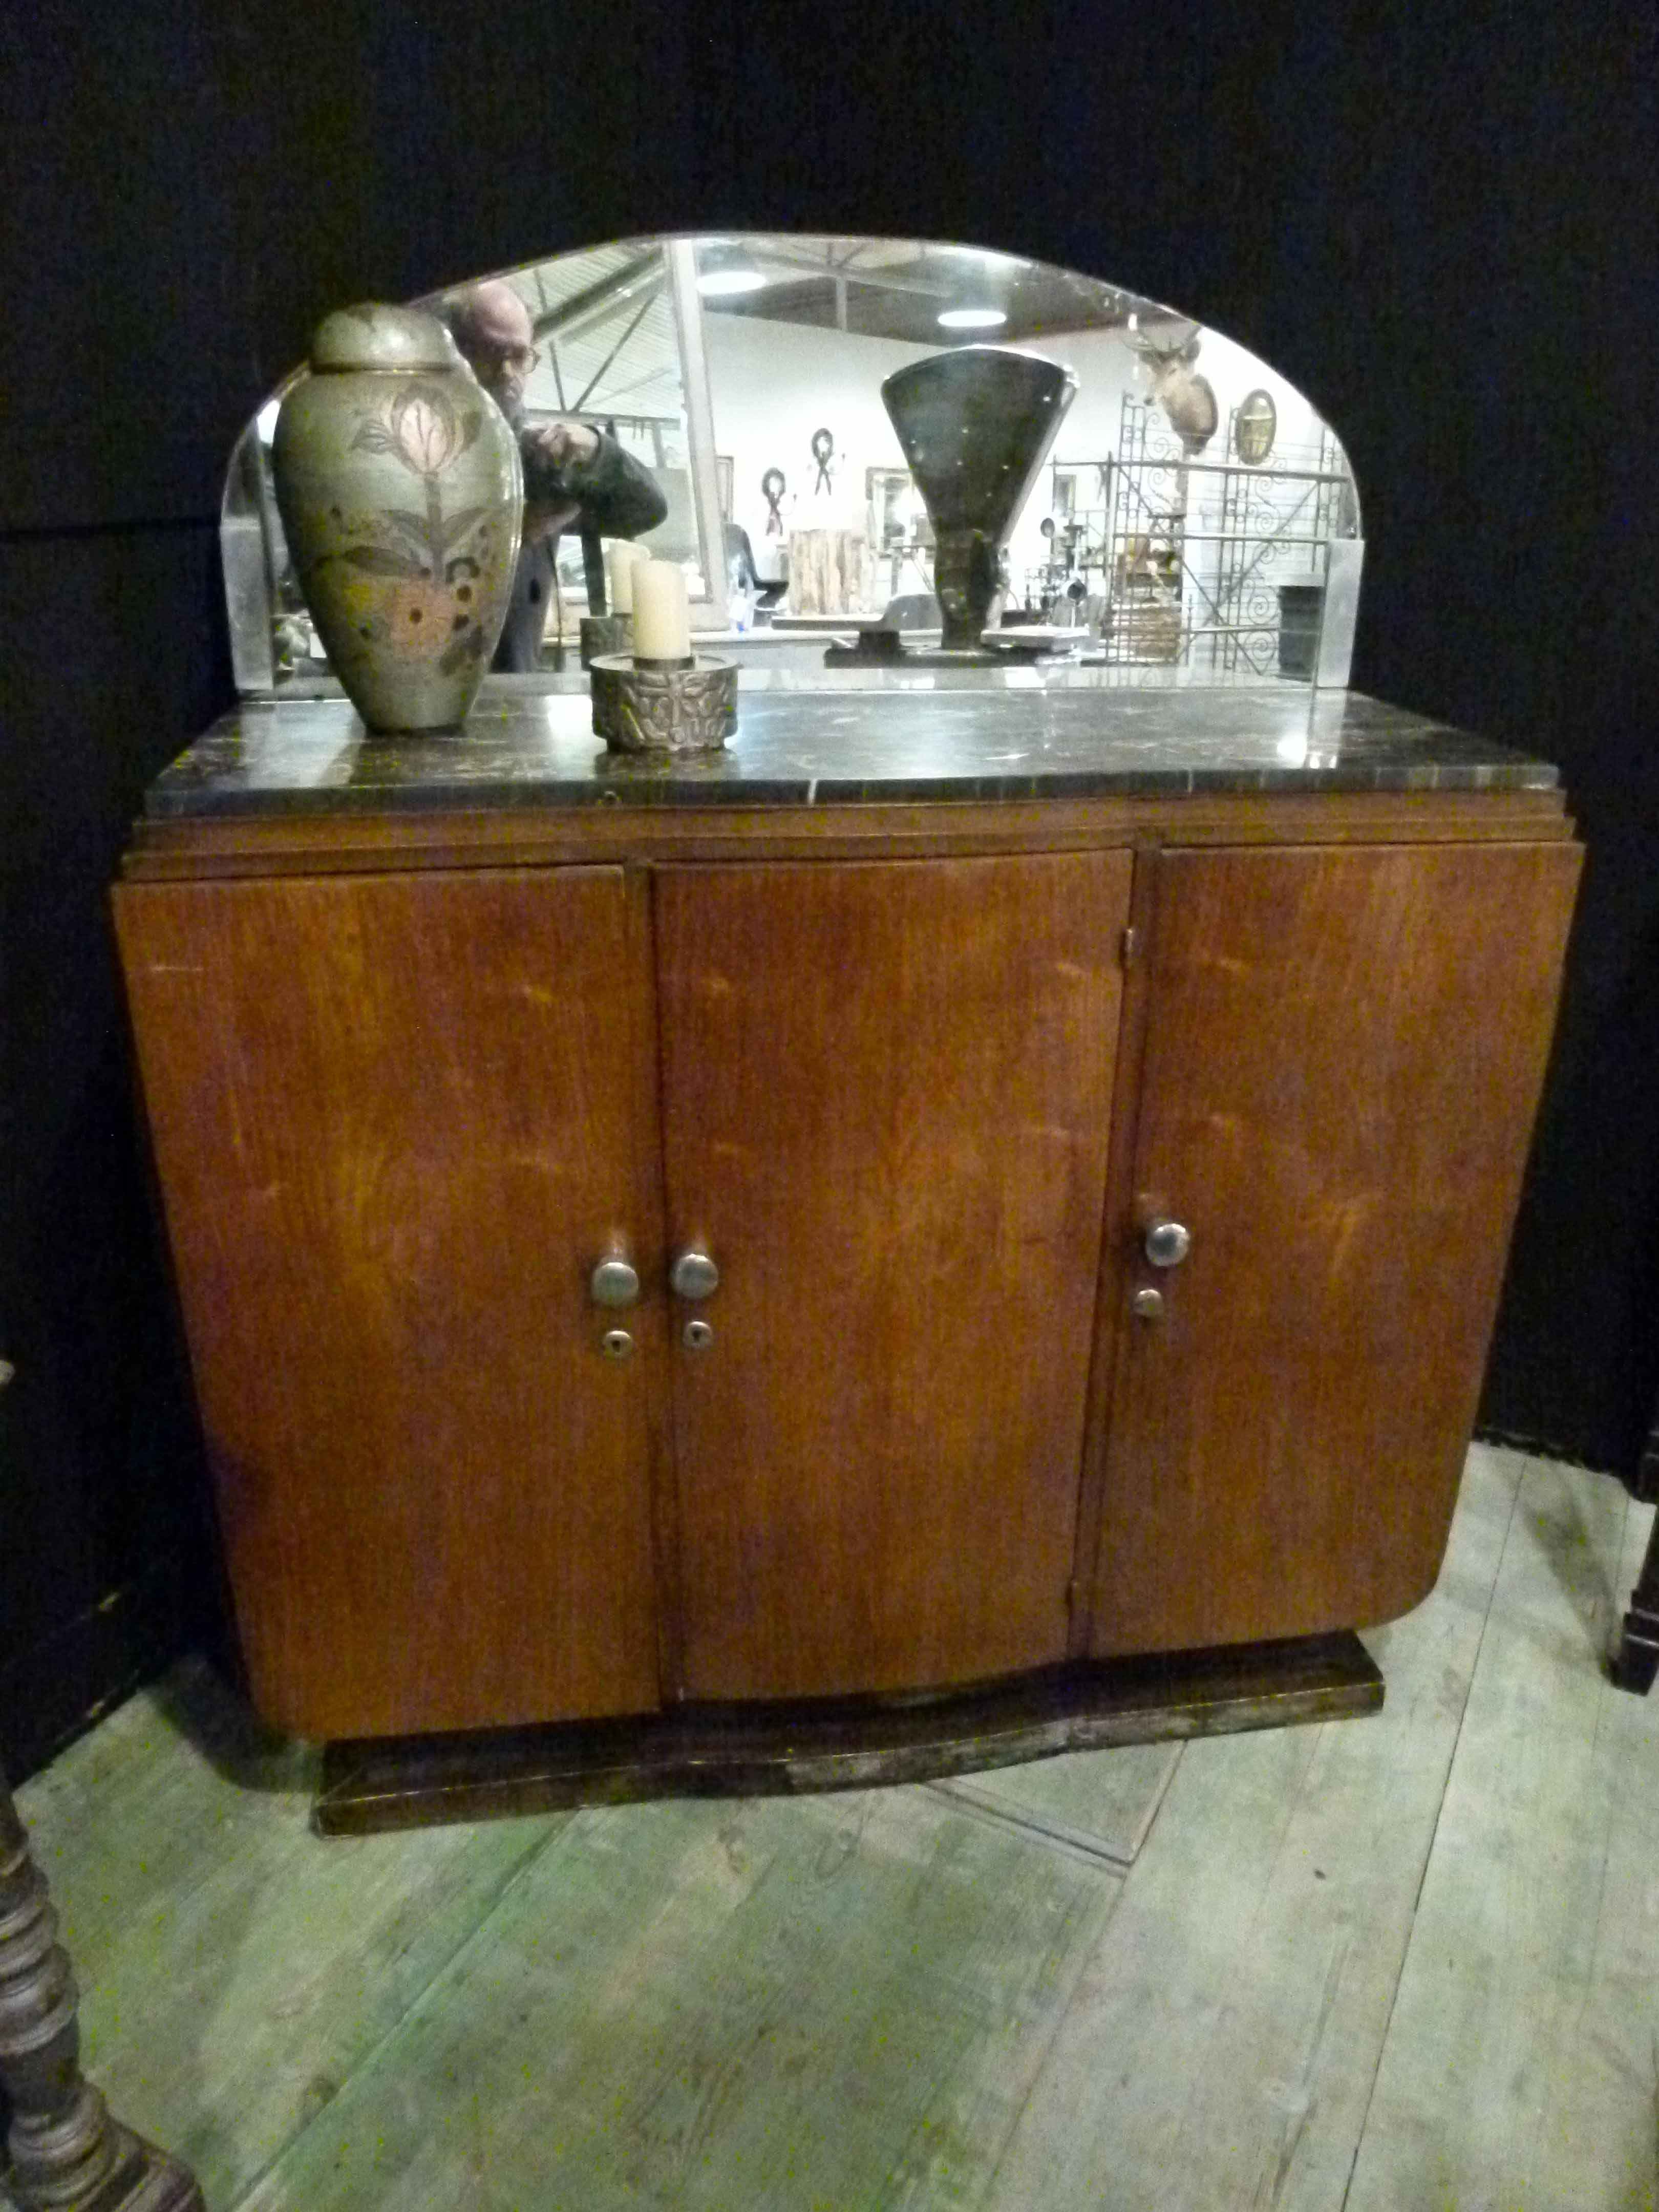 Small Art Deco walnut and marble French buffet with a crescent moon shaped mirror incorporated on the top.
The buffet comprises three frontal doors that open to three shelves in the interior. A black marble with mirror complete this very special